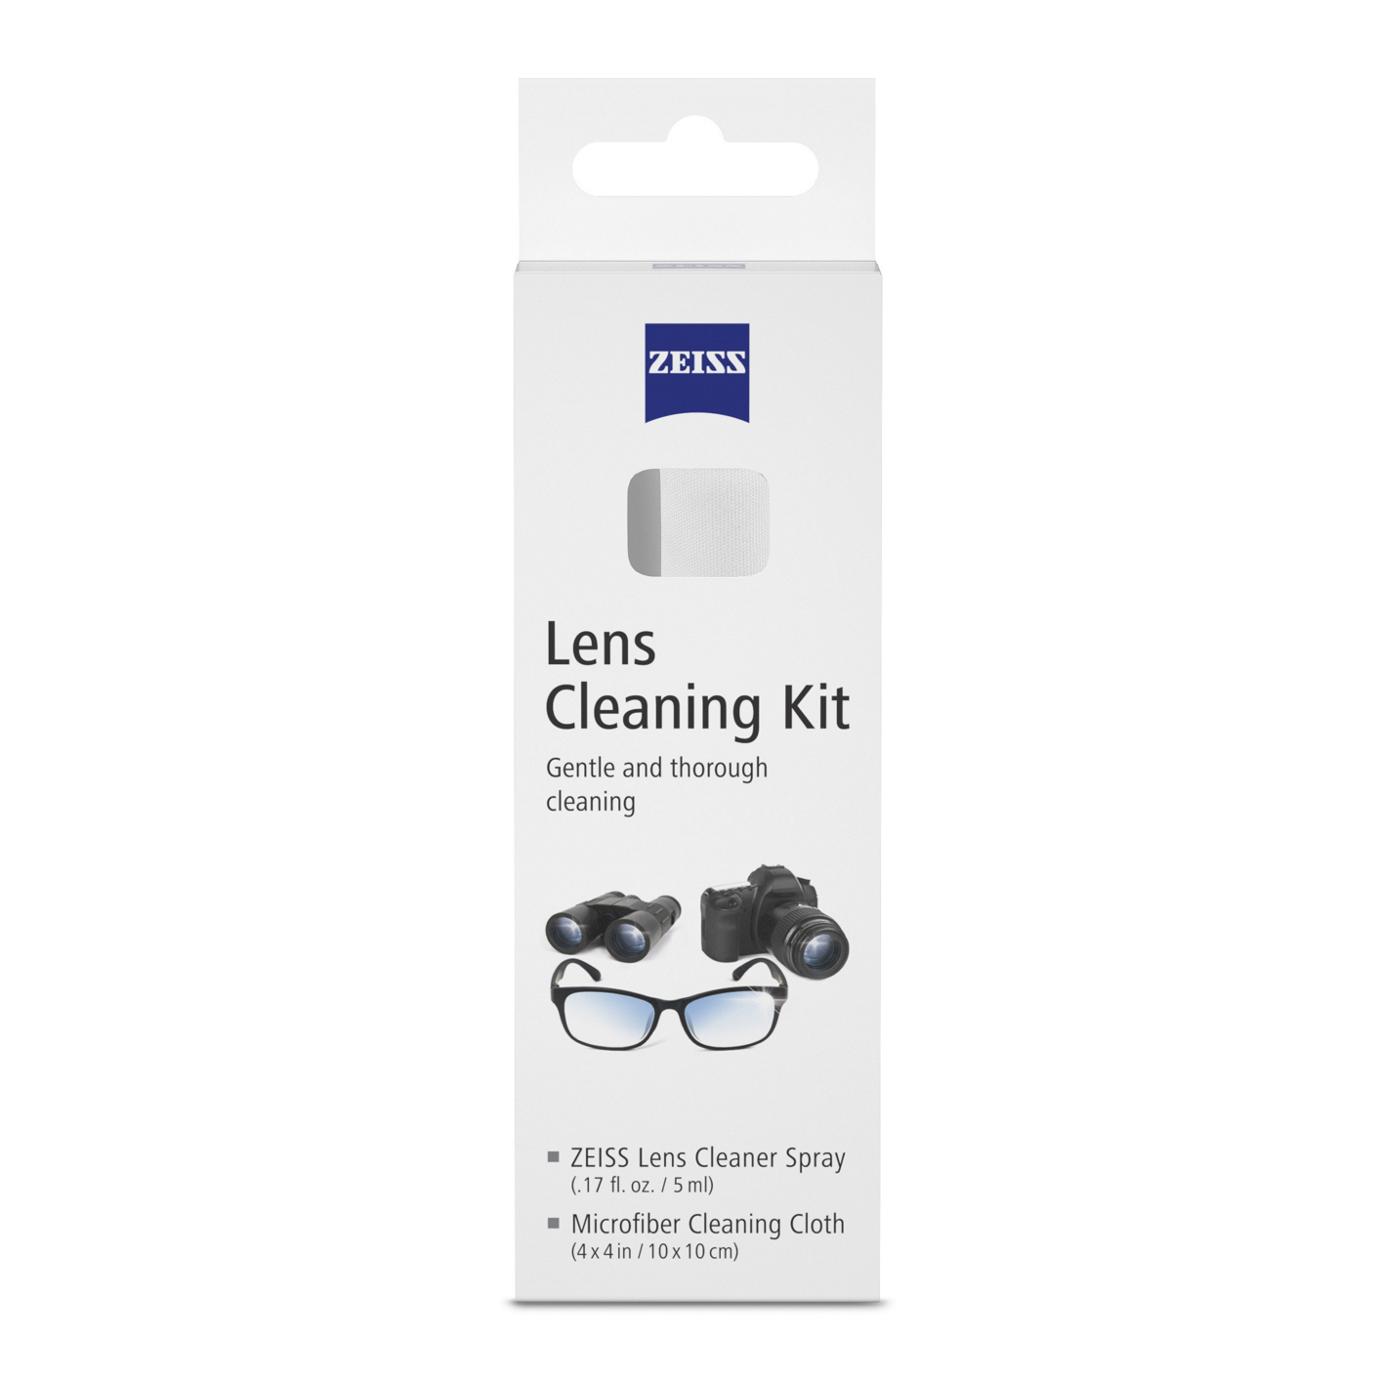 Zeiss Lens Cleaning Kit; image 1 of 2